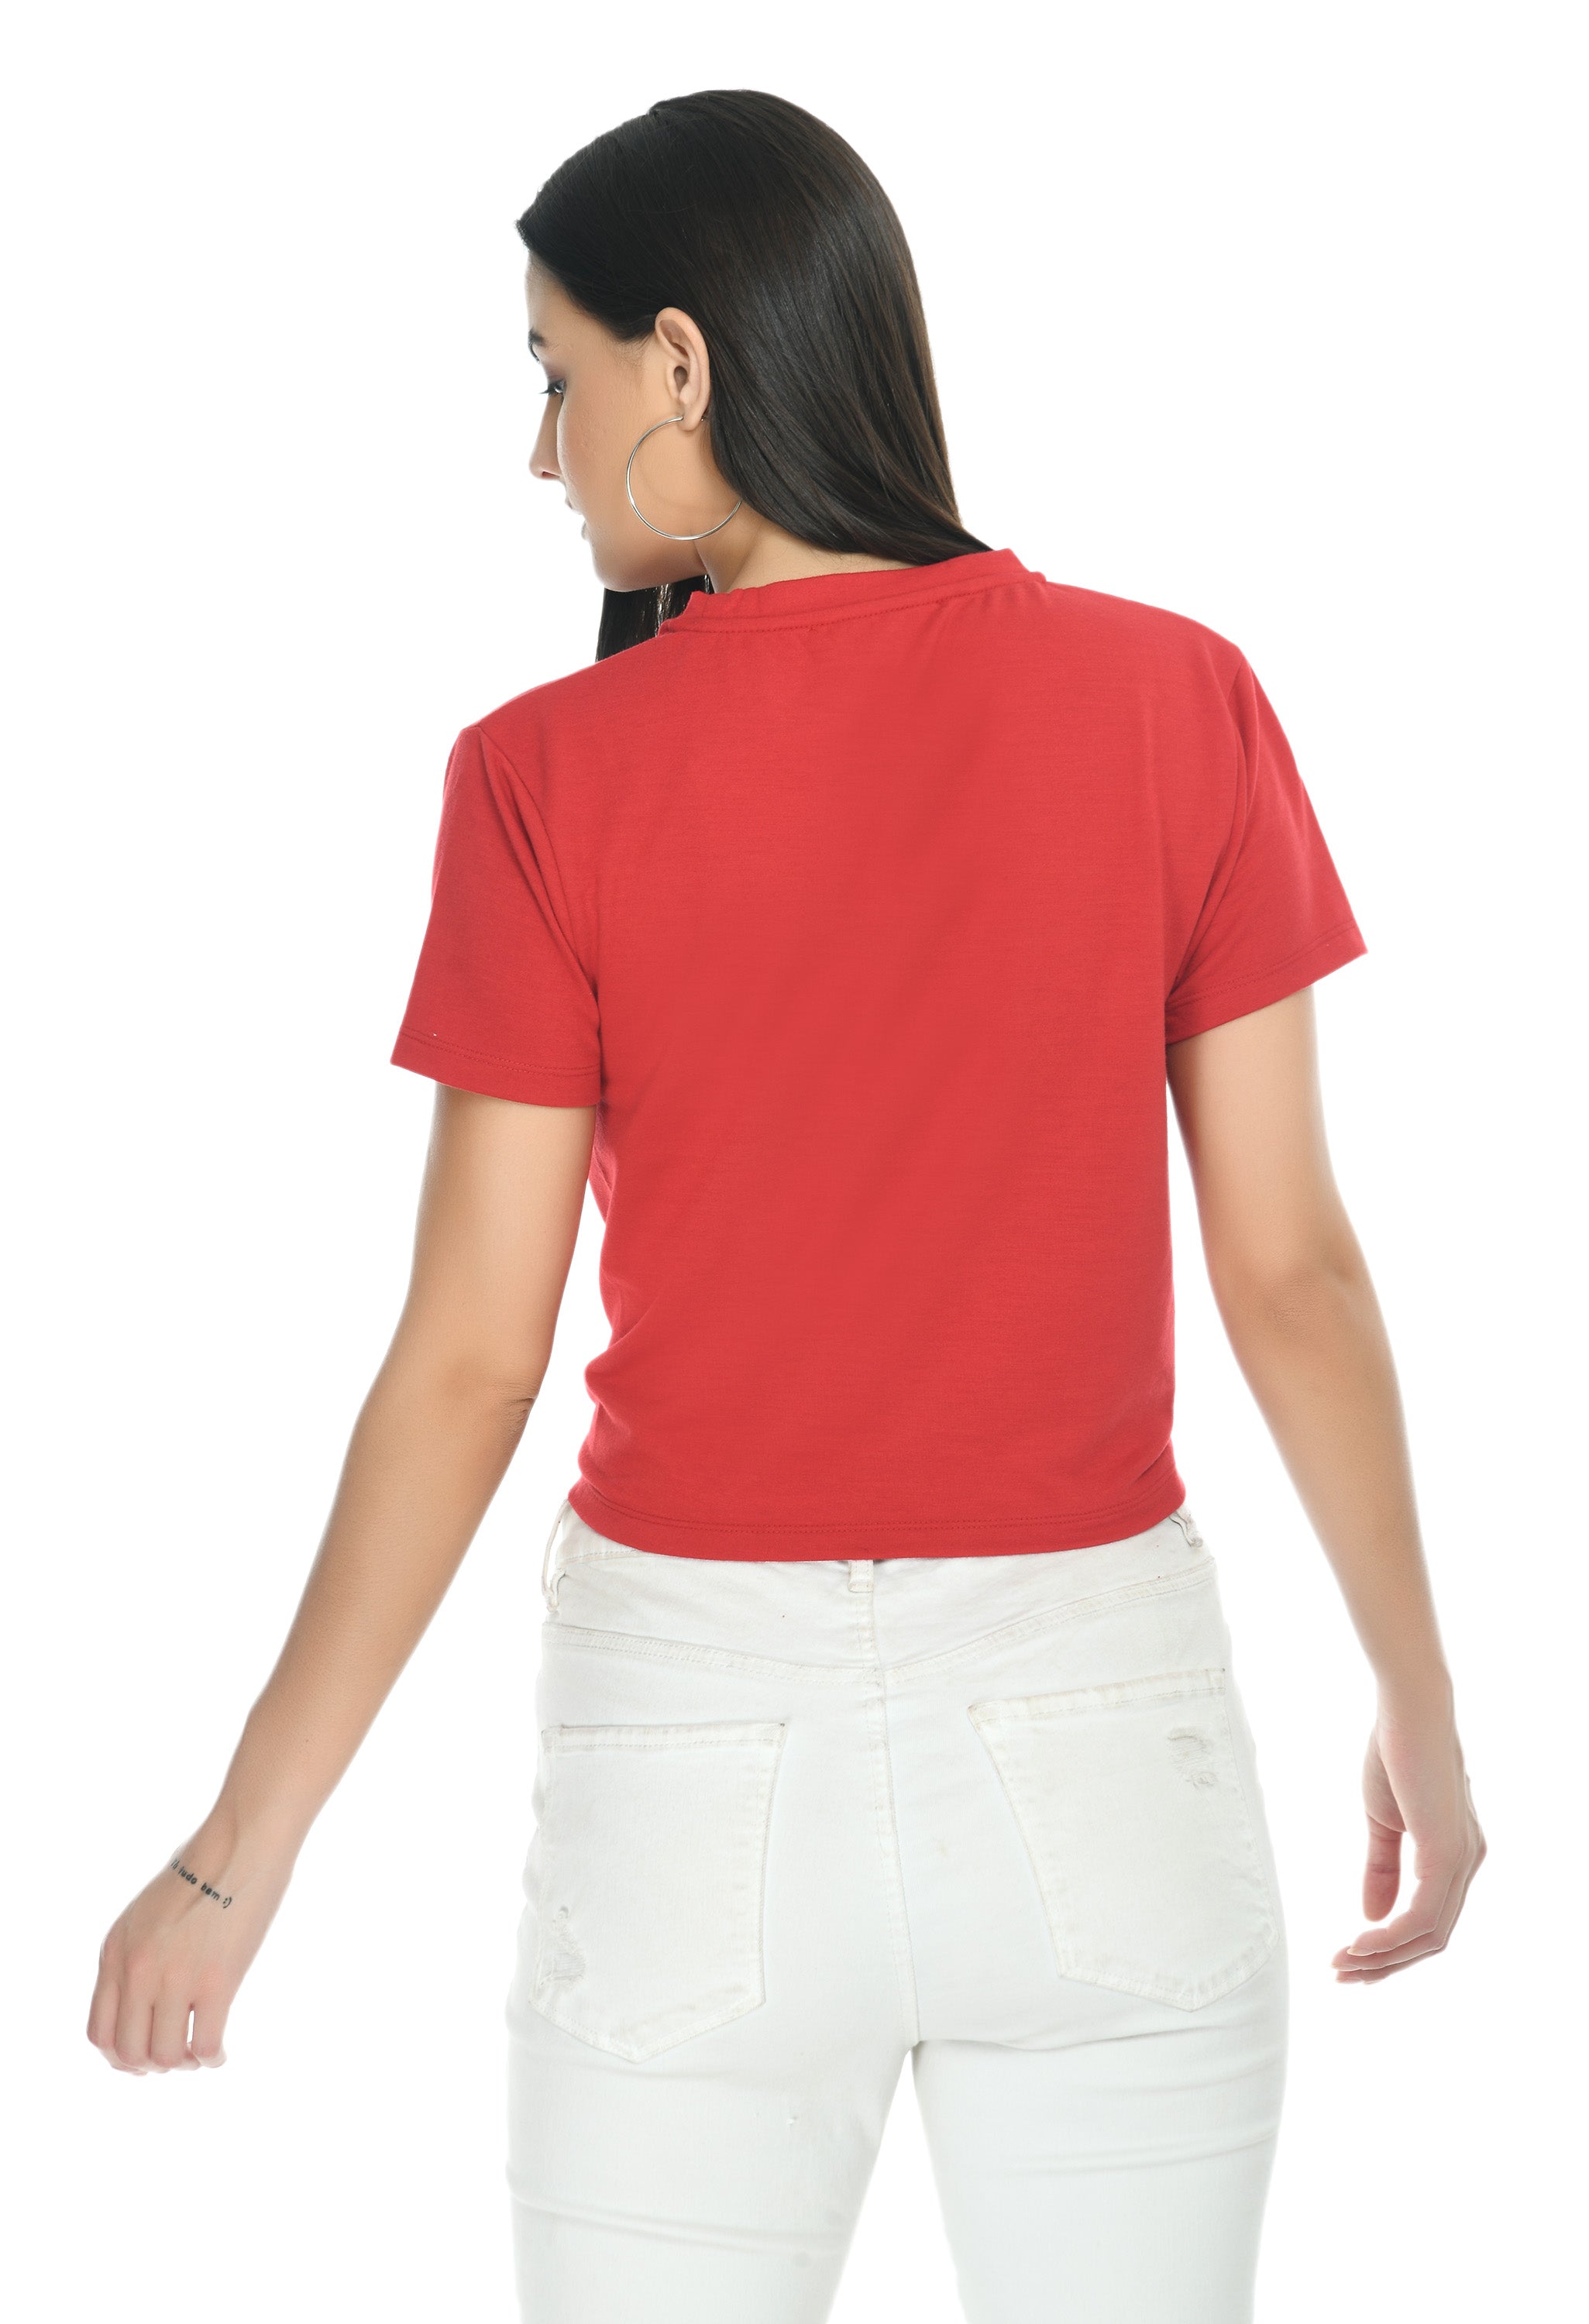 Rue Collection Red Color Round Neck Short Sleeve Crop Top for Women & Girl